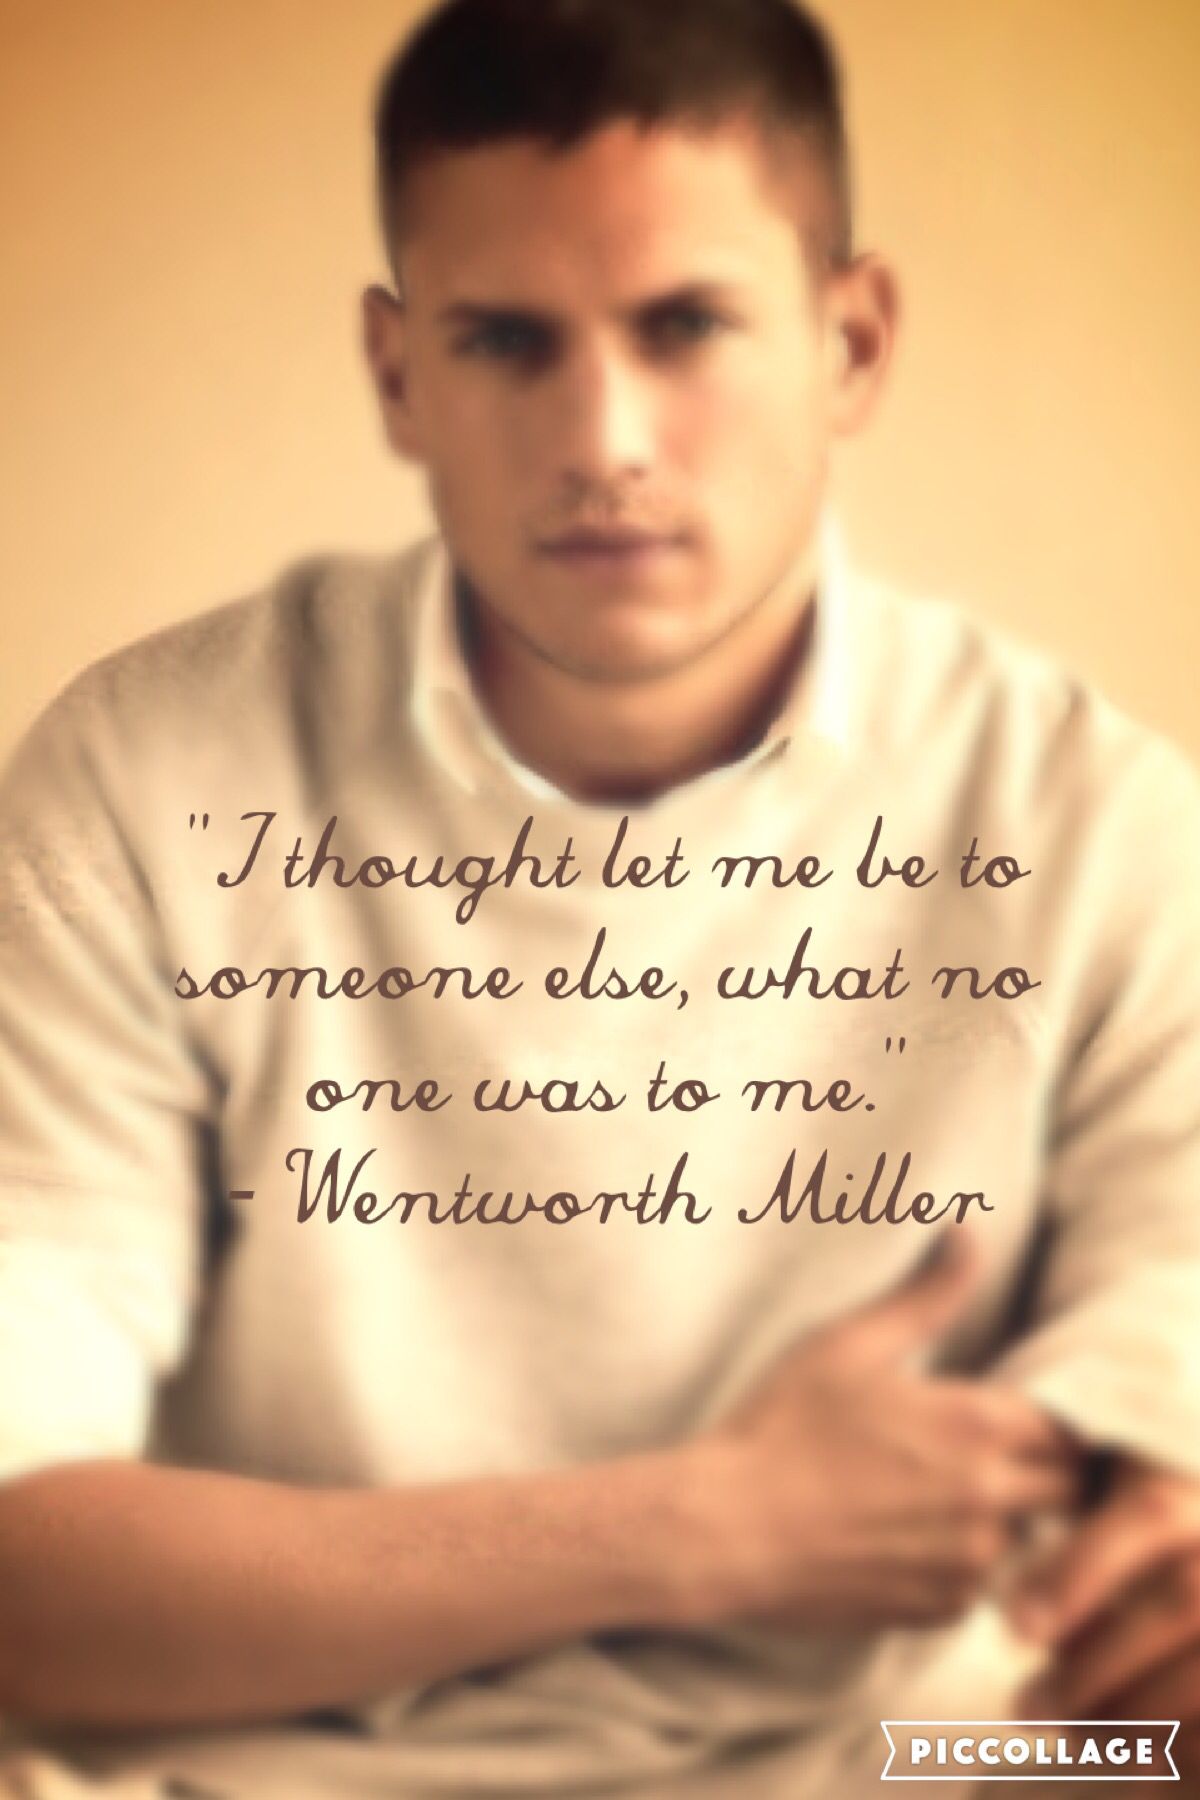 Wentworth Miller Quote Wallpaper - Wentworth Miller , HD Wallpaper & Backgrounds